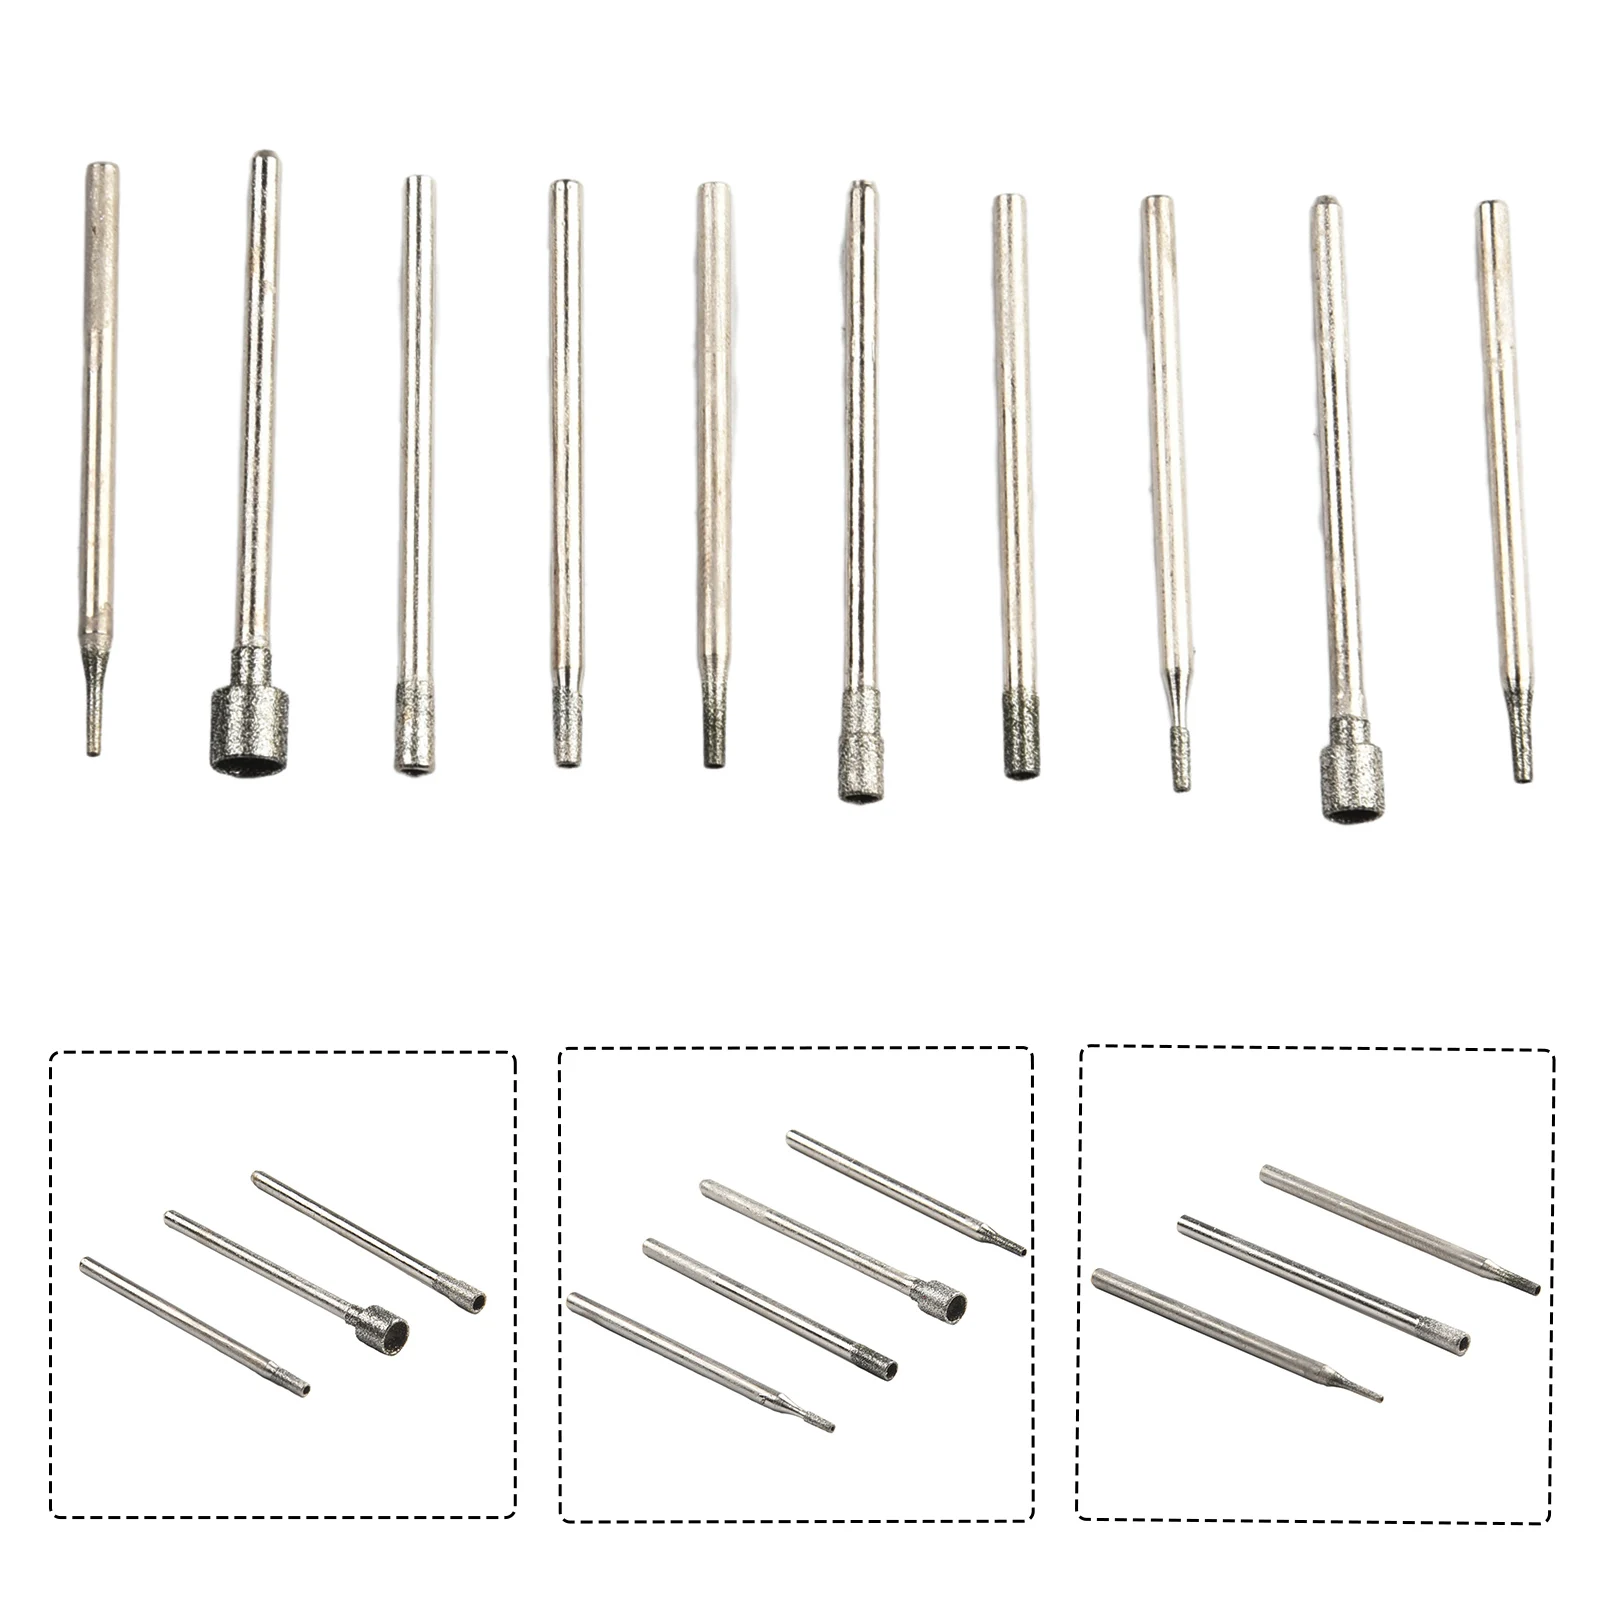 10pcs Diamond Burr Core Set 0.8-5mm Diamond Grinding Head Kit 2.35mm Shank Rotary Tool For Electrical Grinder Accessories